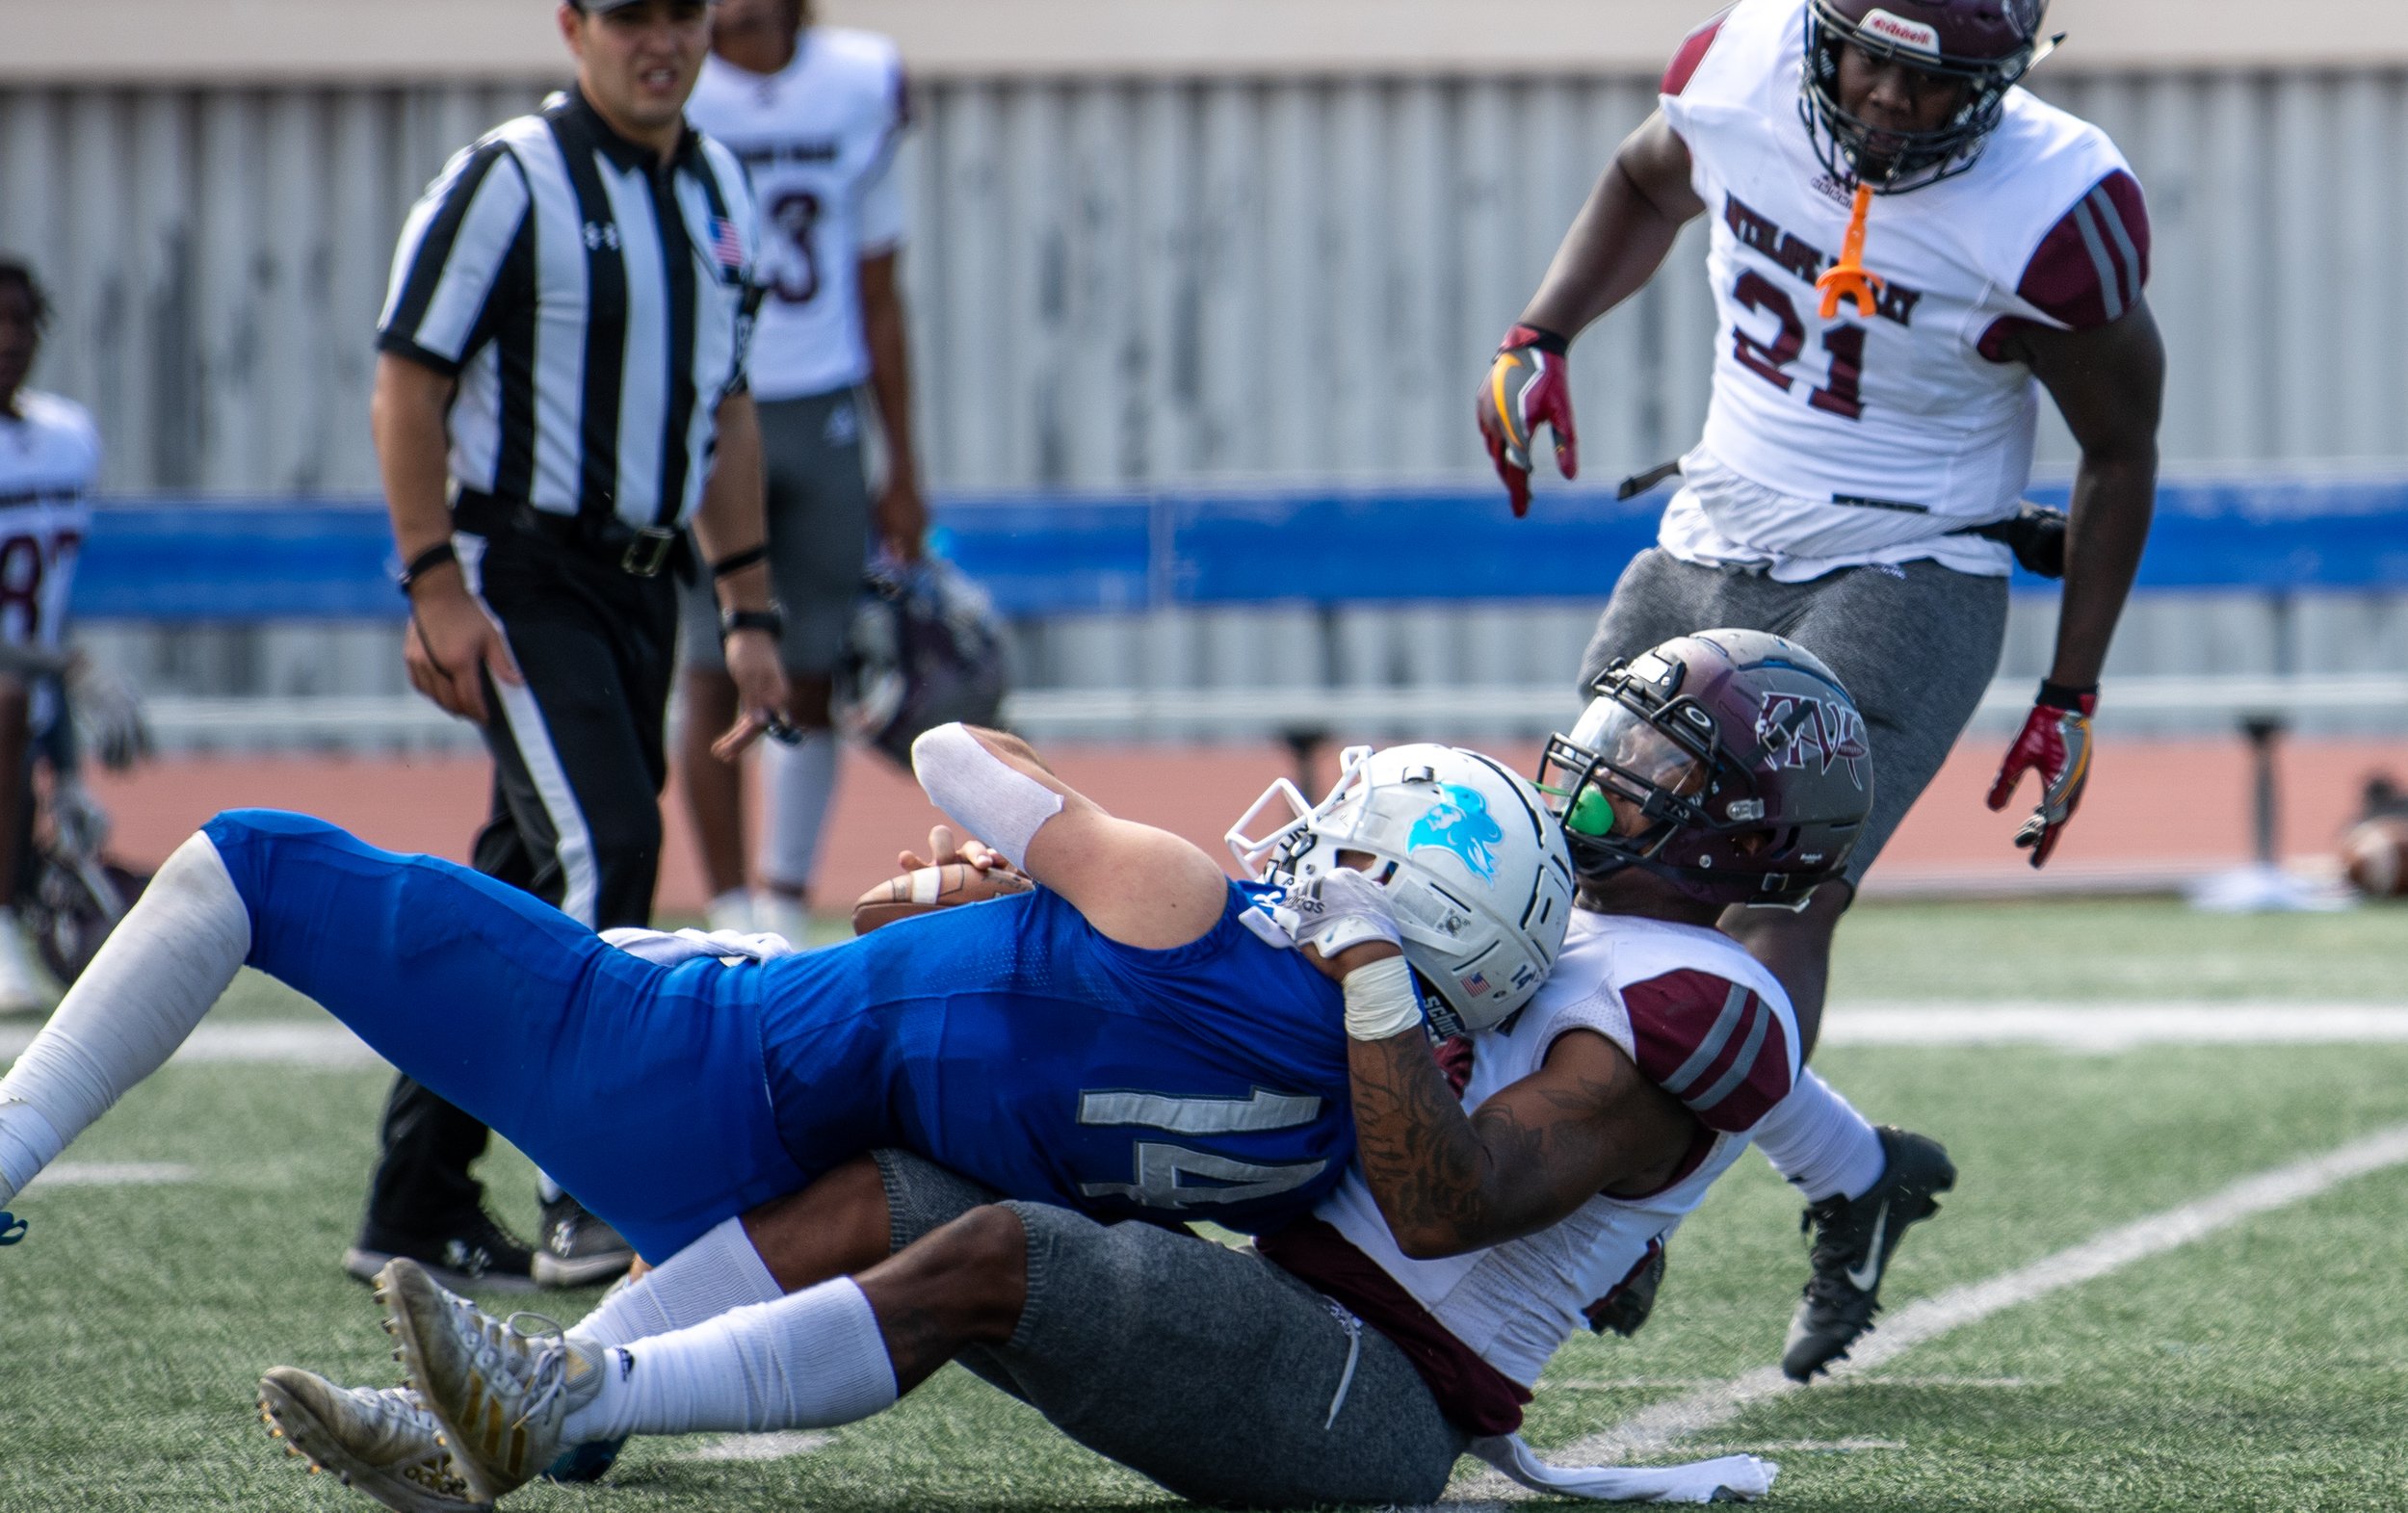  QB Sam Vaulton (14) finds himself sacked and turned around at Santa Monica College's main campus field in Santa Monica, Calif. on October 23, 2021. The game against Antelope Valley is the first home game since a nine-person COVID infection that forc